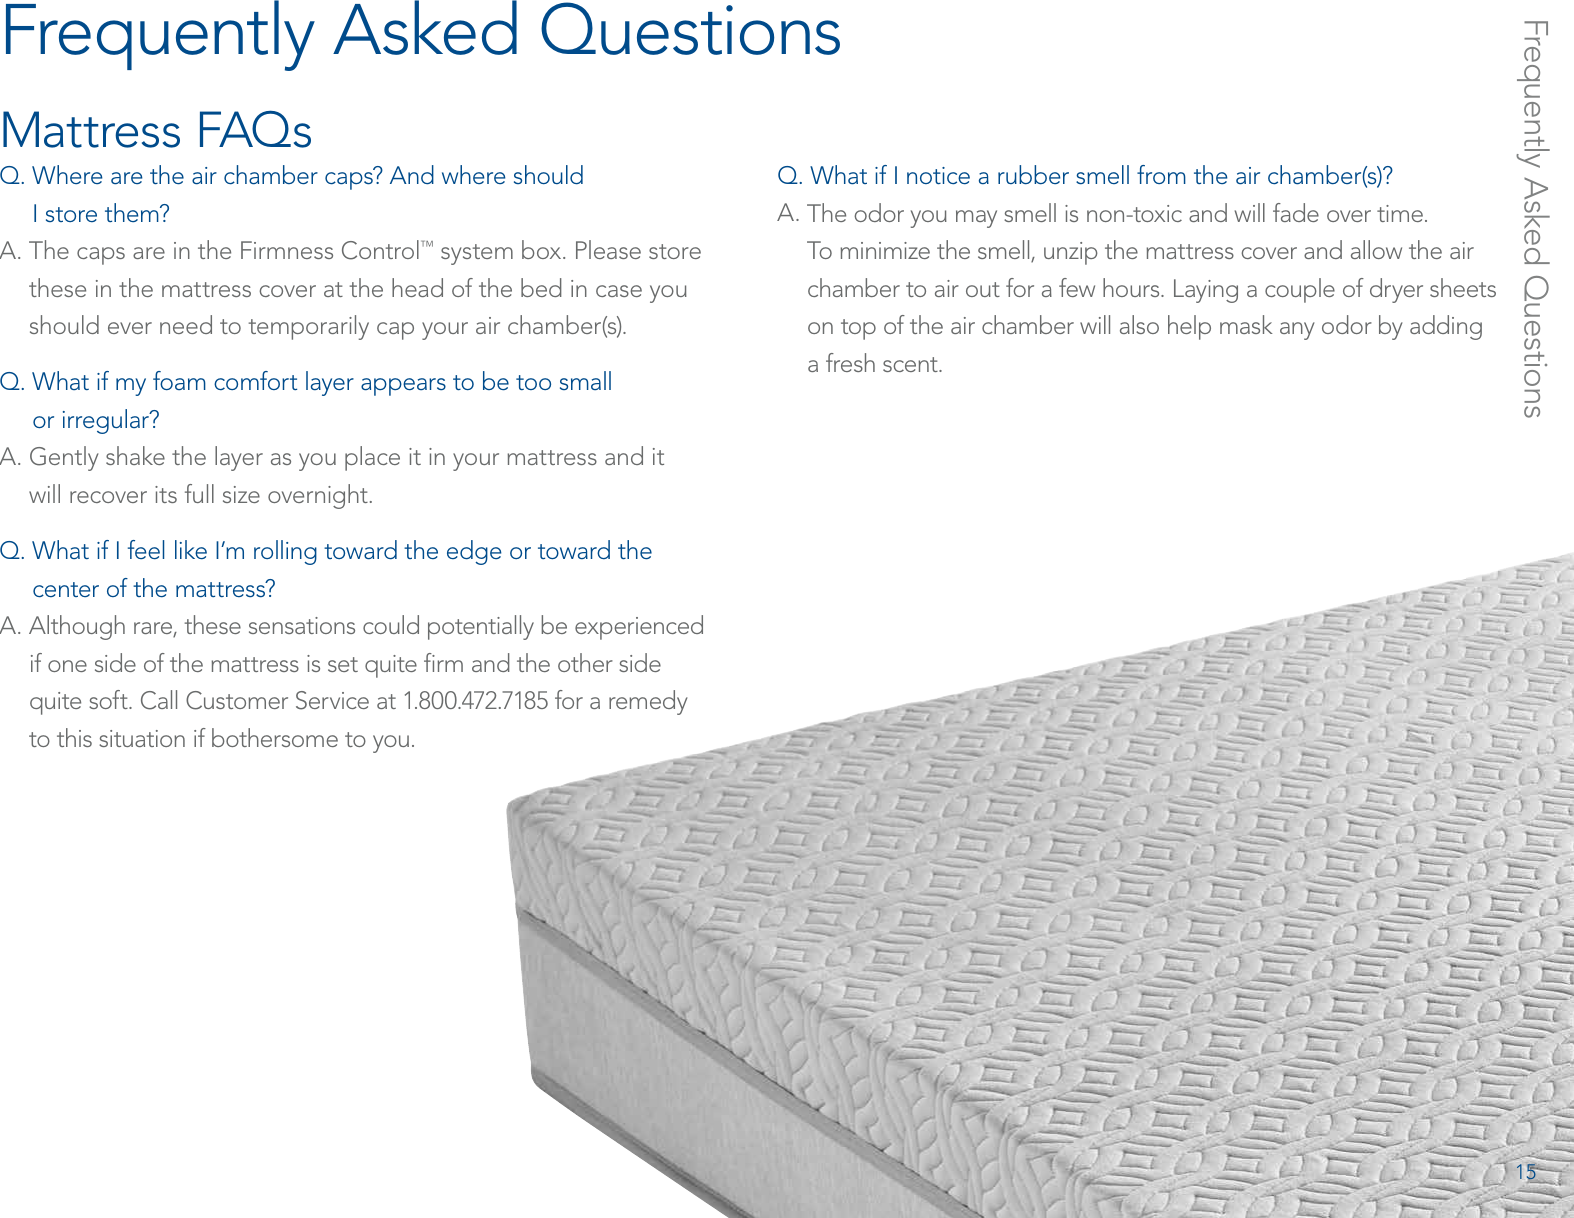 Frequently Asked QuestionsMattress FAQsQ.  Where are the air chamber caps? And where should  I store them?A.  The caps are in the Firmness Control™ system box. Please store these in the mattress cover at the head of the bed in case you should ever need to temporarily cap your air chamber(s).Q.  What if my foam comfort layer appears to be too small  or irregular?A.  Gently shake the layer as you place it in your mattress and it  will recover its full size overnight.Q.  What if I feel like I’m rolling toward the edge or toward the center of the mattress?A.  Although rare, these sensations could potentially be experienced if one side of the mattress is set quite ﬁrm and the other side quite soft. Call Customer Service at 1.800.472.7185 for a remedy  to this situation if bothersome to you.Q.  What if I notice a rubber smell from the air chamber(s)? A.  The odor you may smell is non-toxic and will fade over time.  To minimize the smell, unzip the mattress cover and allow the air chamber to air out for a few hours. Laying a couple of dryer sheets on top of the air chamber will also help mask any odor by adding a fresh scent.Frequently Asked Questions15